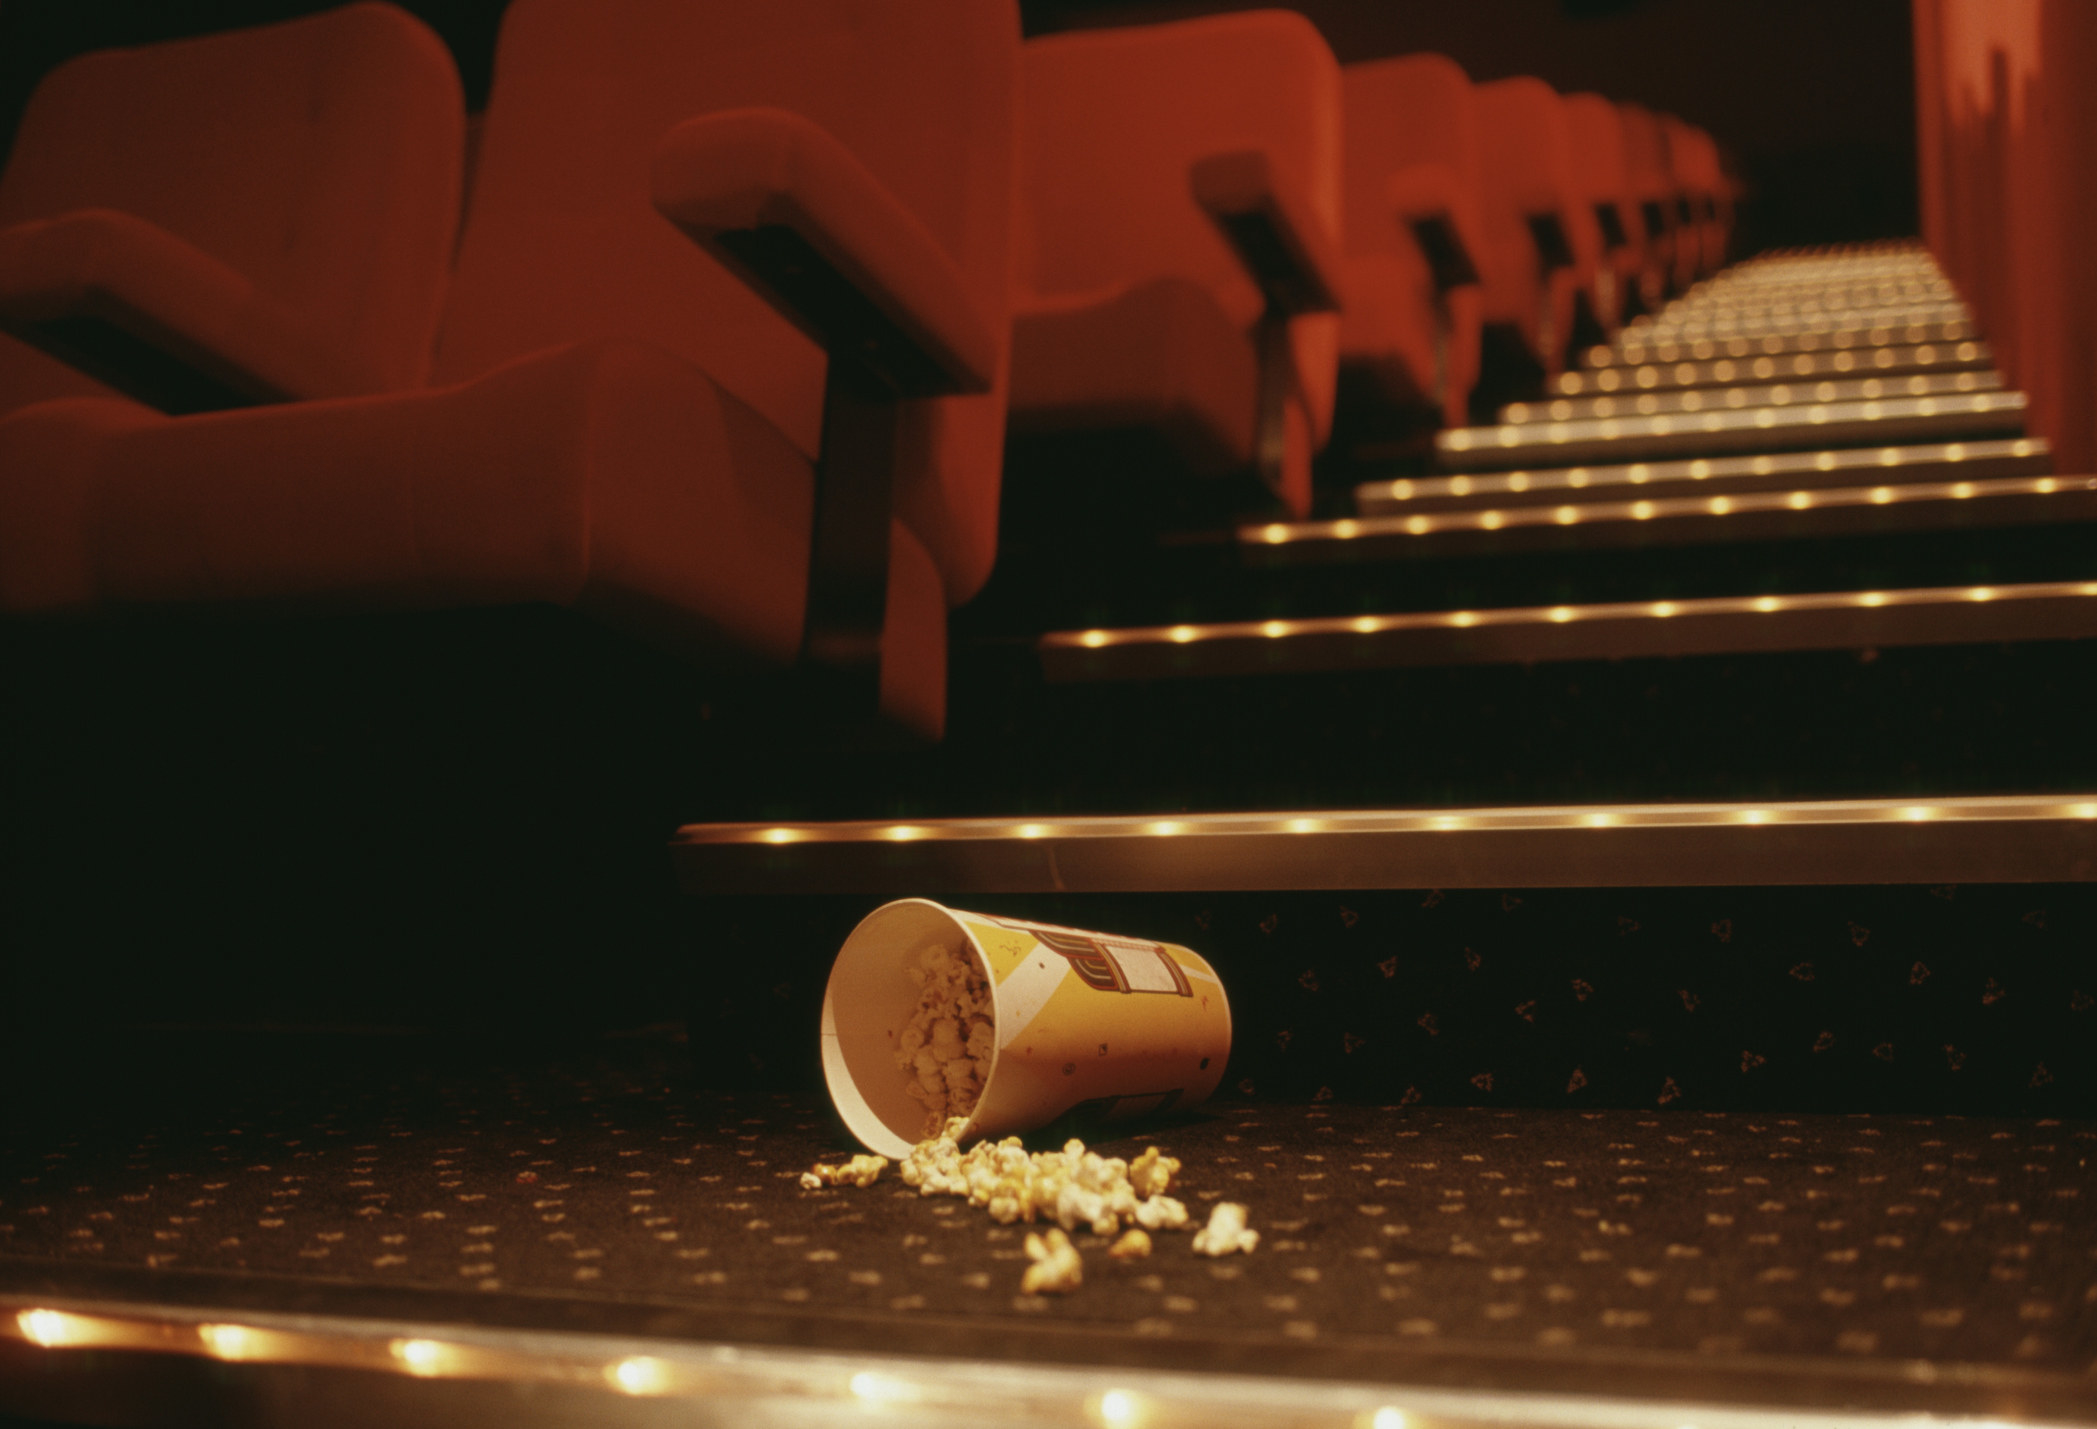 Popcorn spilling from a cup on the floor of an empty movie theater